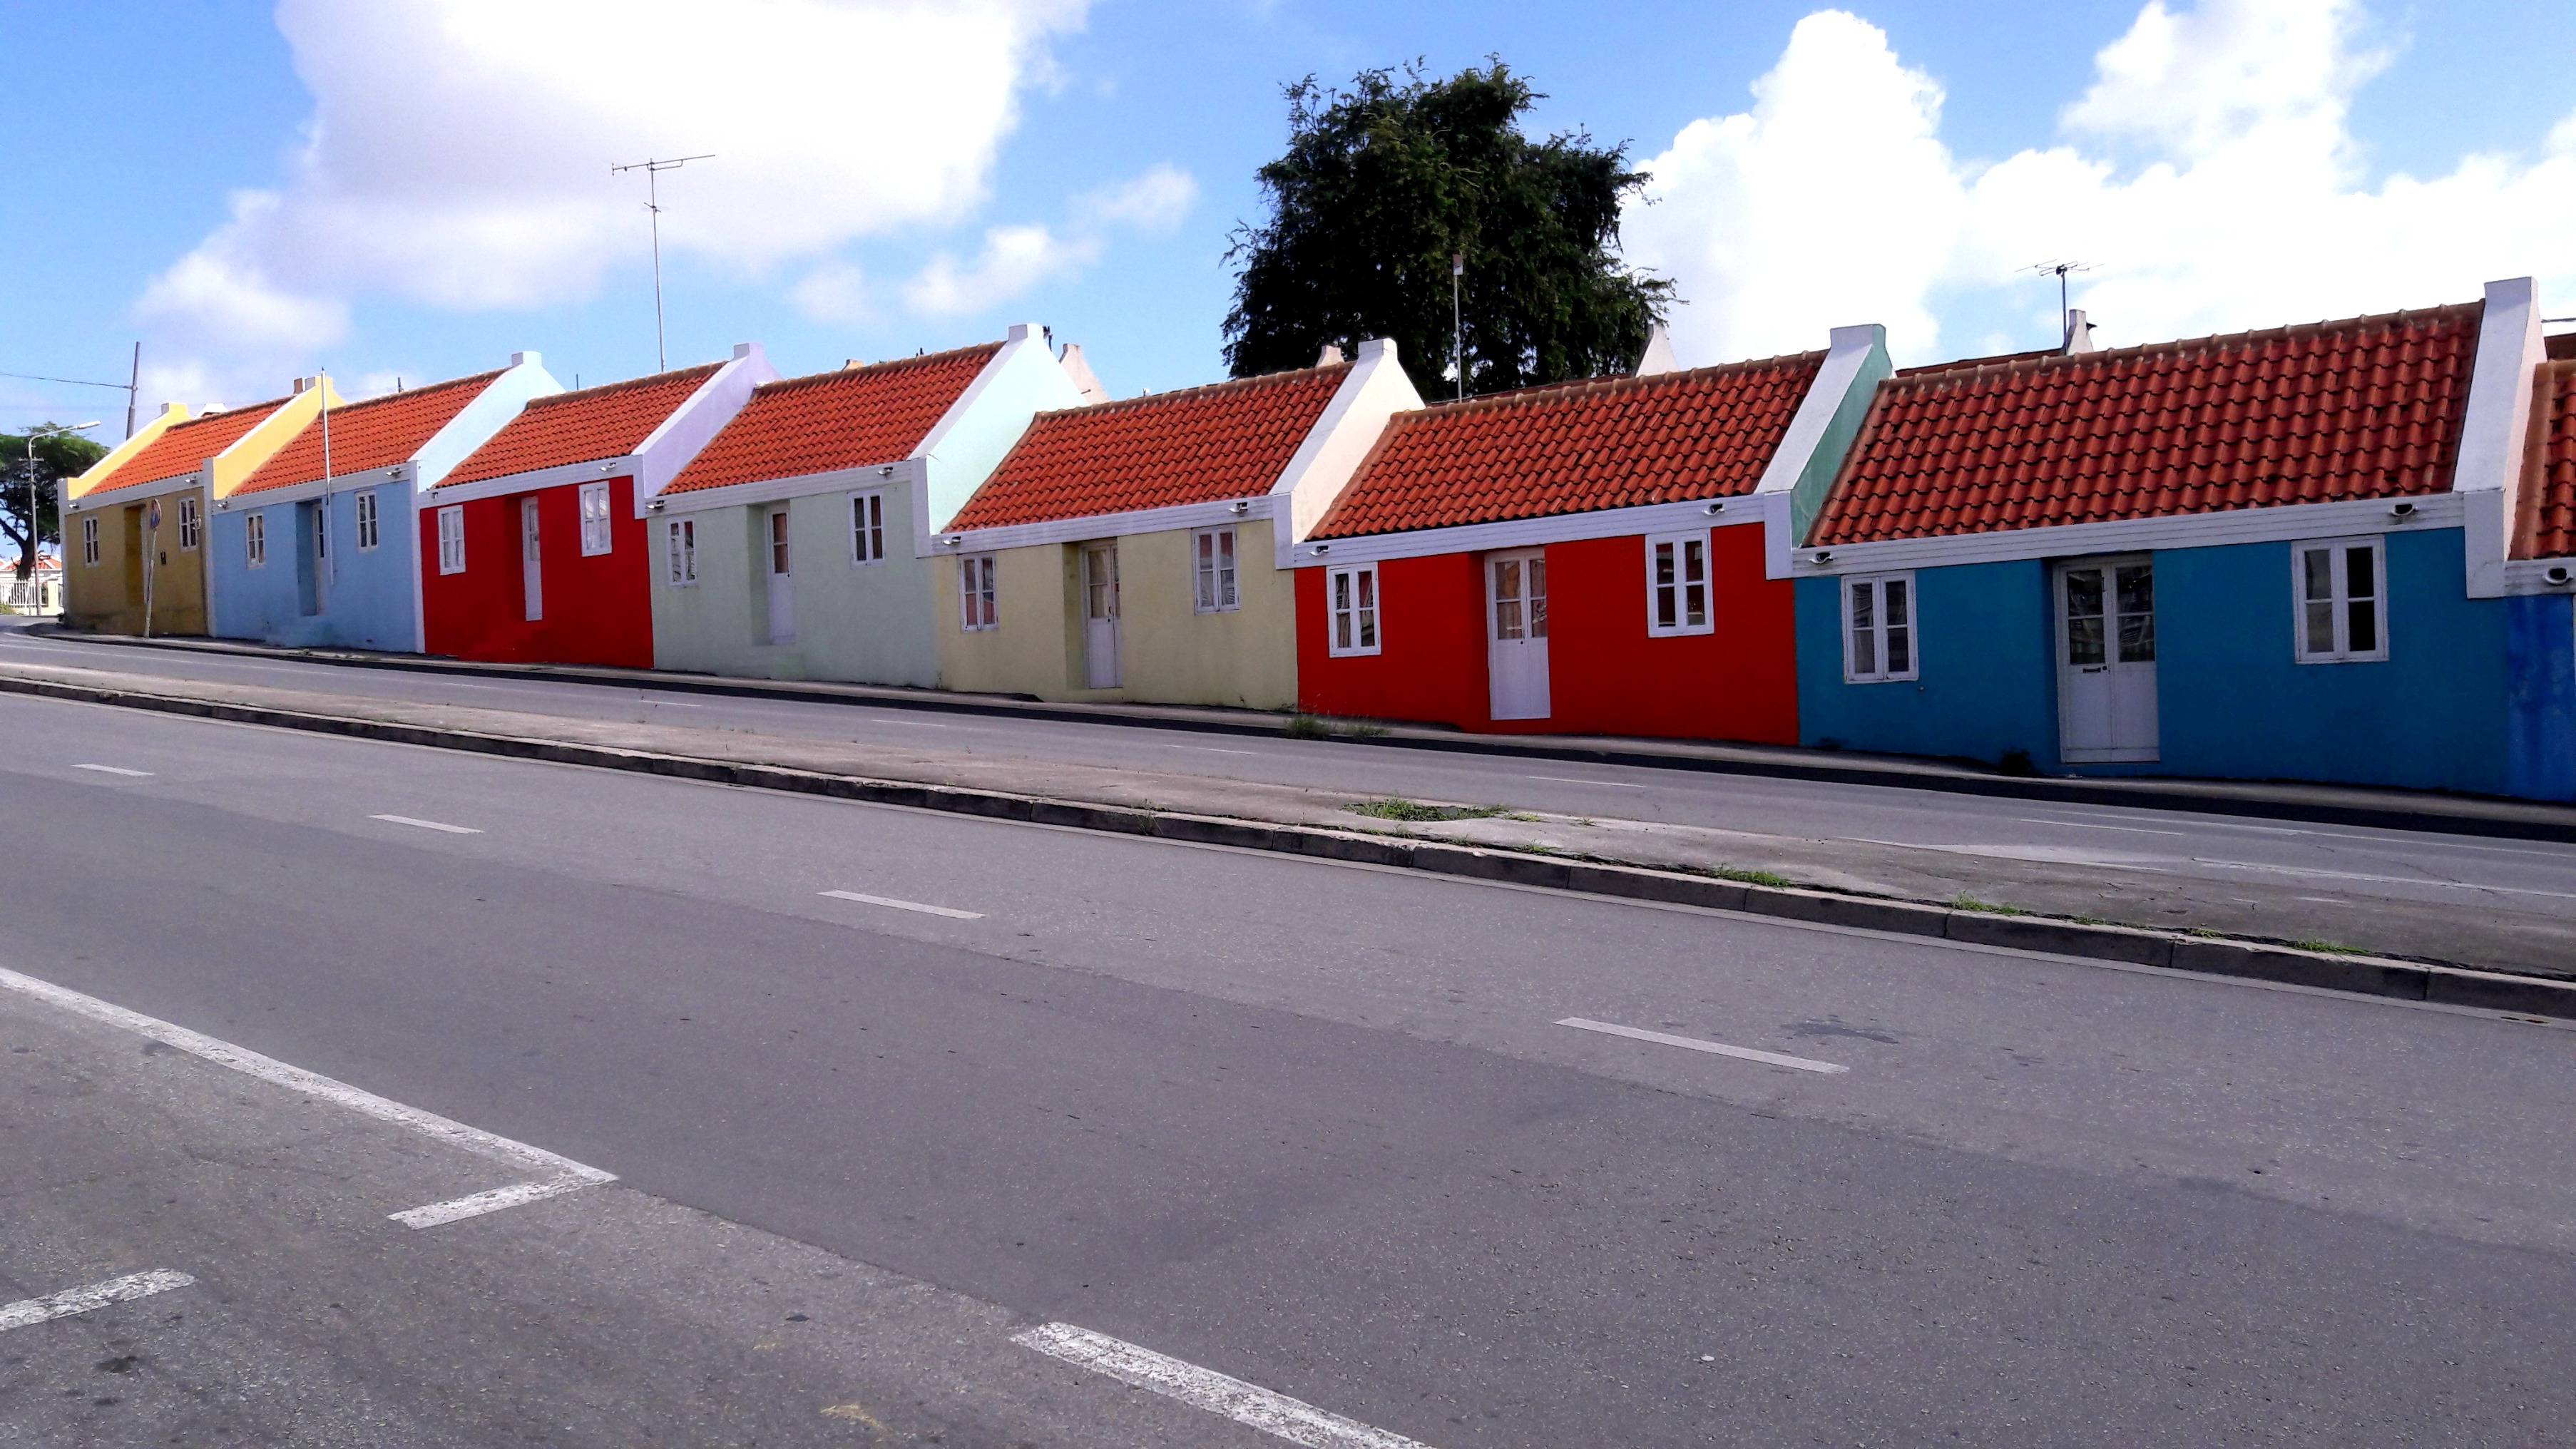 vibrant-colors-willemstad-curacao-1